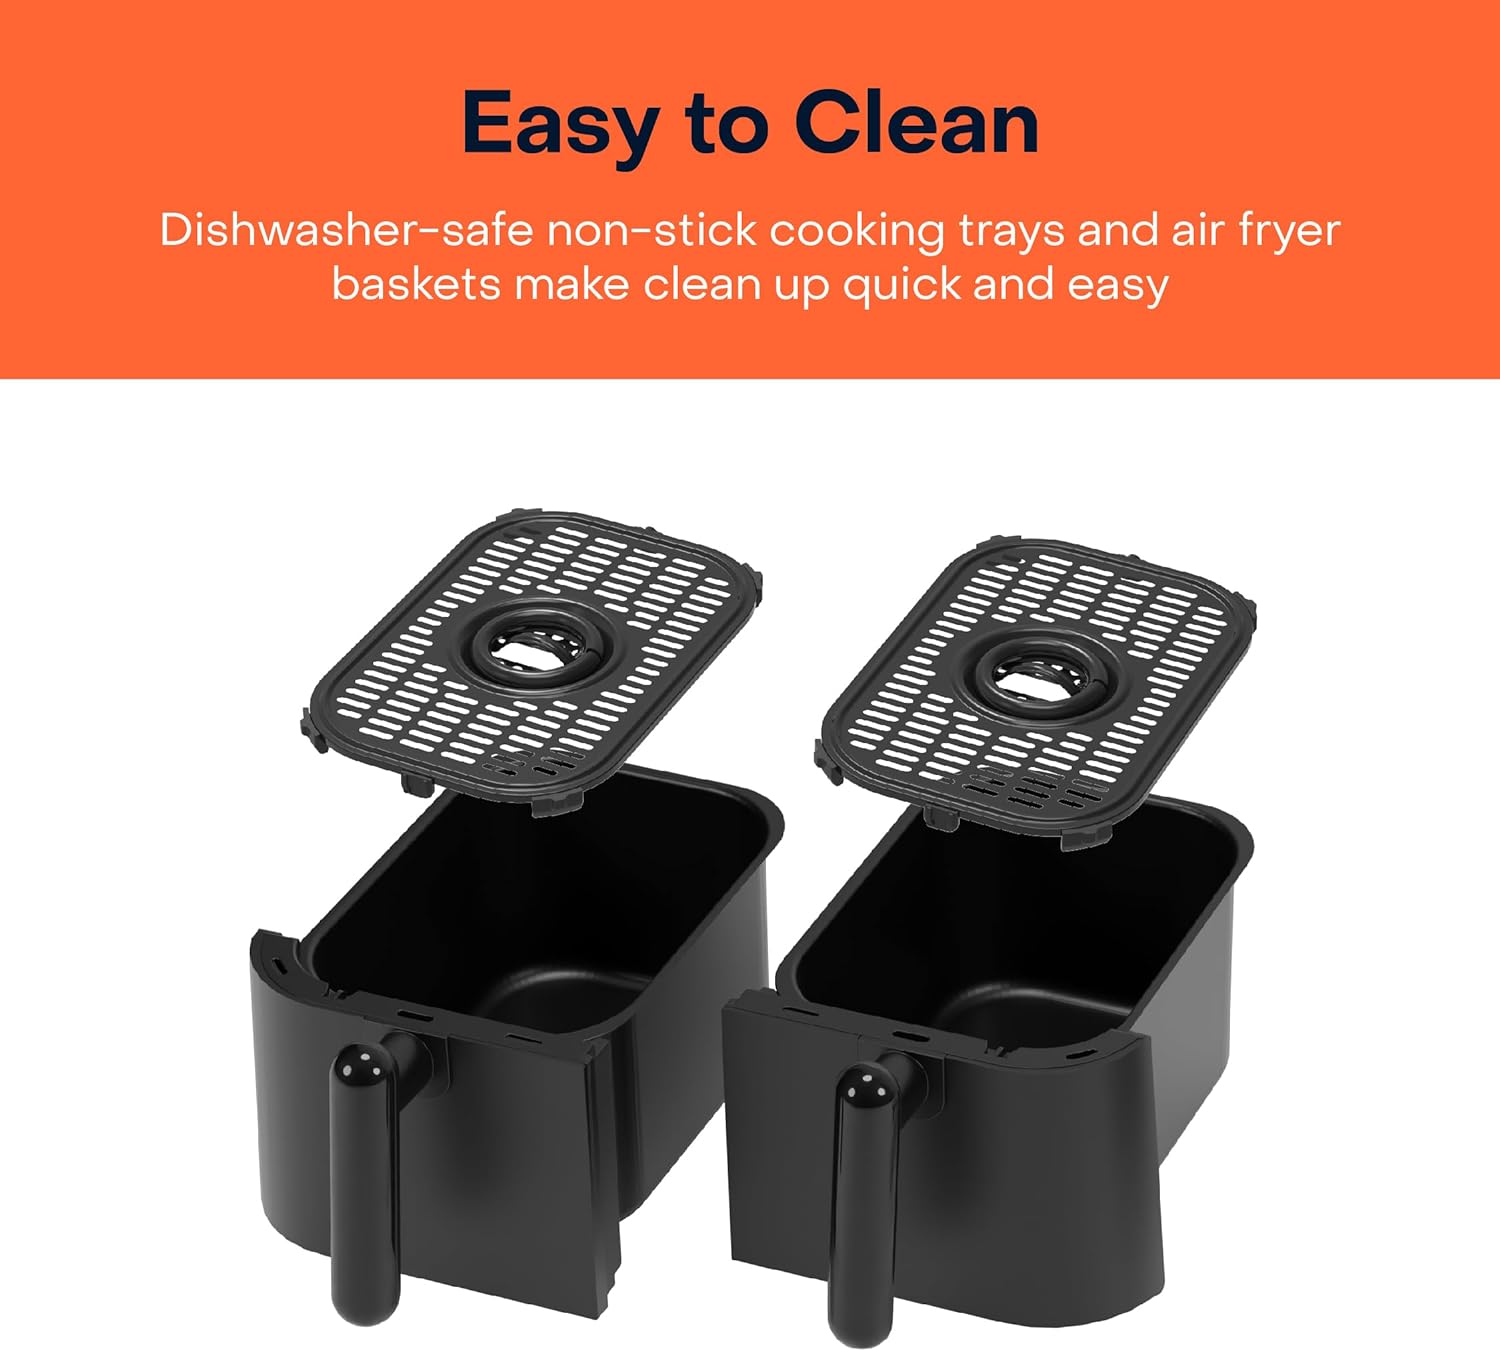 Air Fryer Duo 2 Non-Vision 8.5L / Independently Controlled Dual Baskets - Black